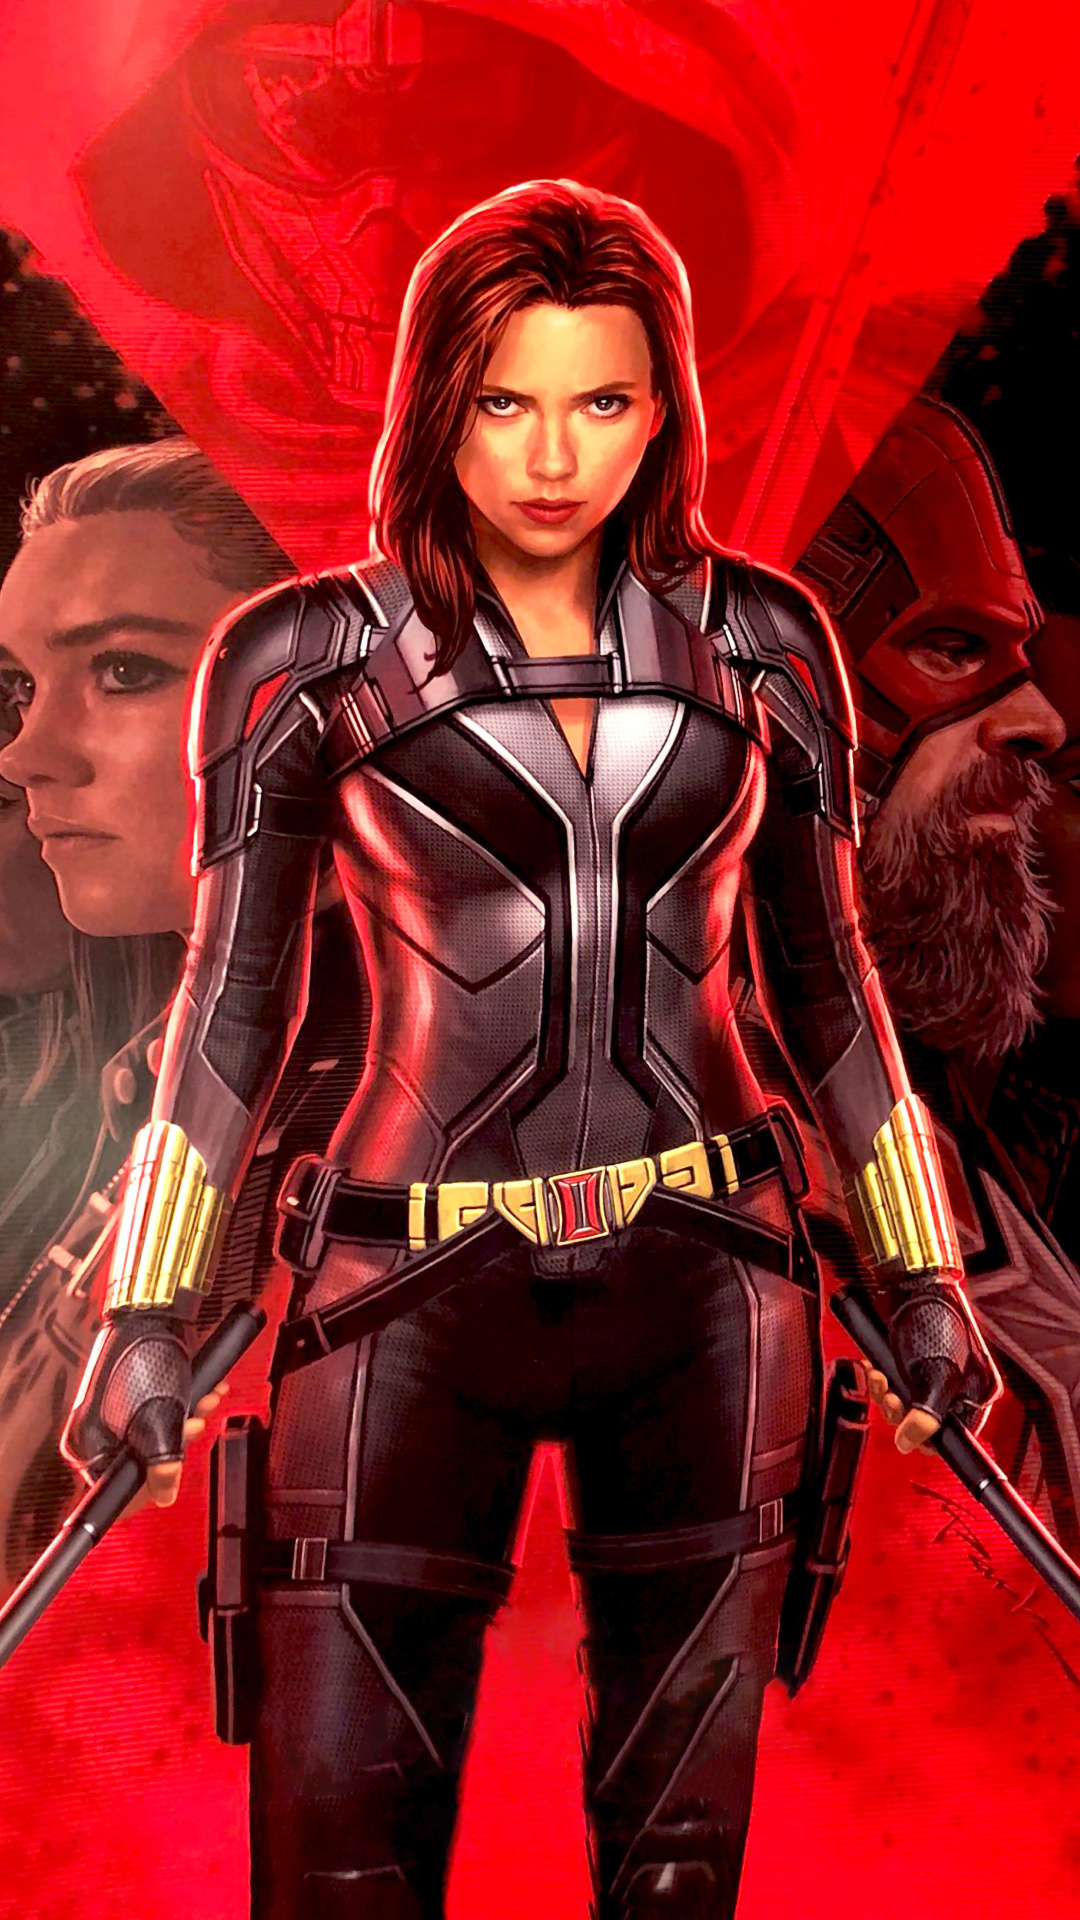 1080x1920 Black Widow Movie Poster Iphone 7 6s 6 Plus And Pixel Xl